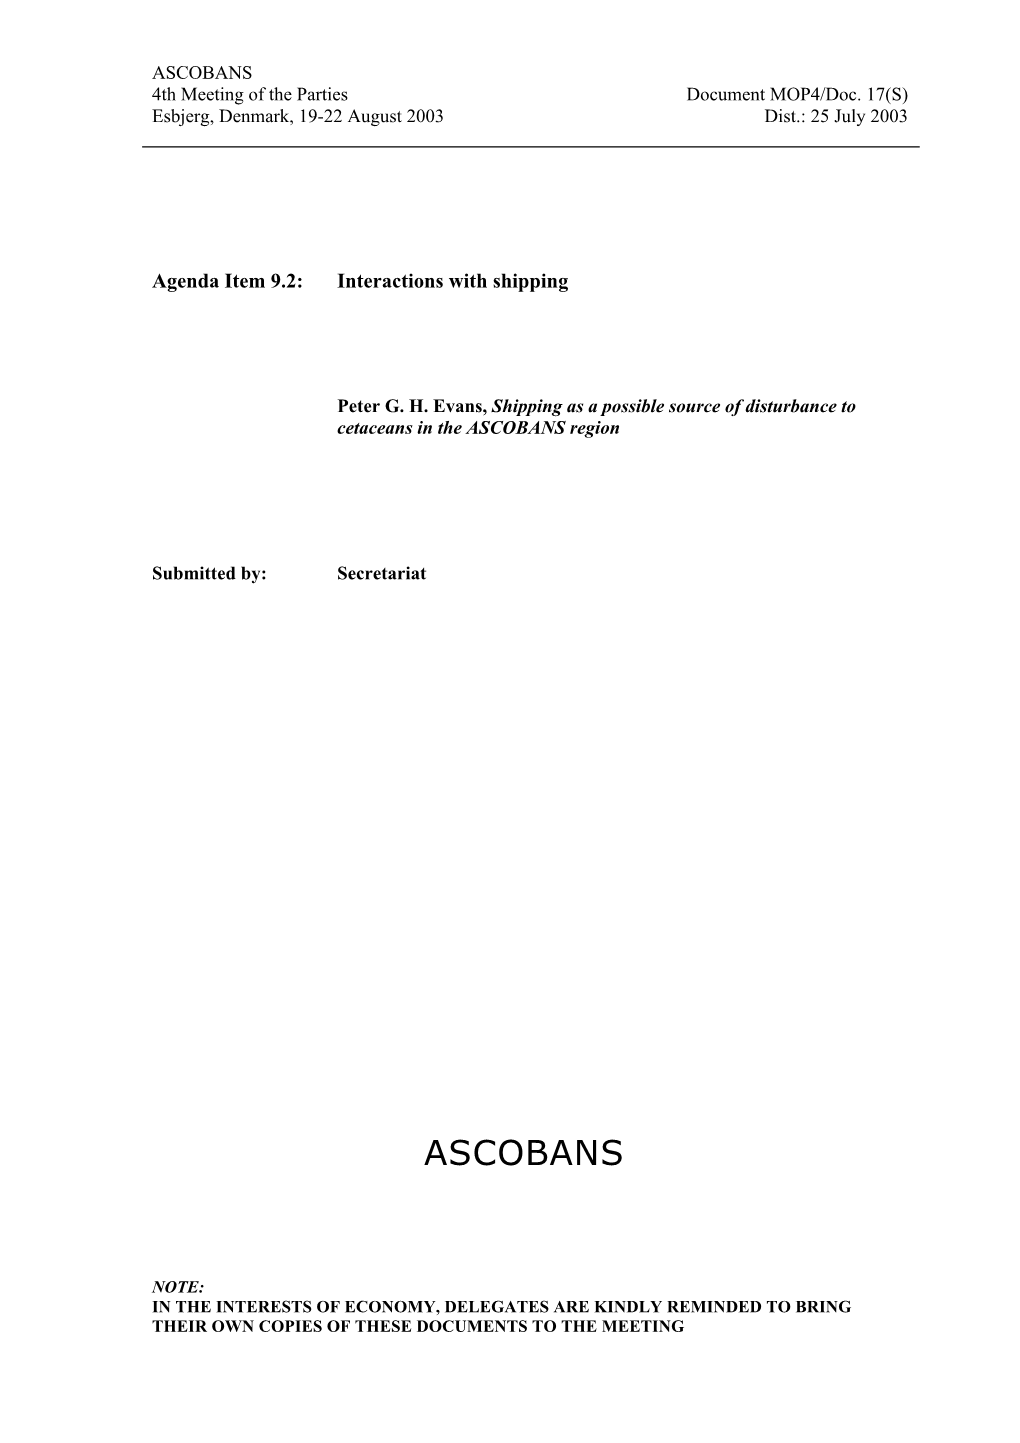 ASCOBANS 4Th Meeting of the Parties Document MOP4/Doc